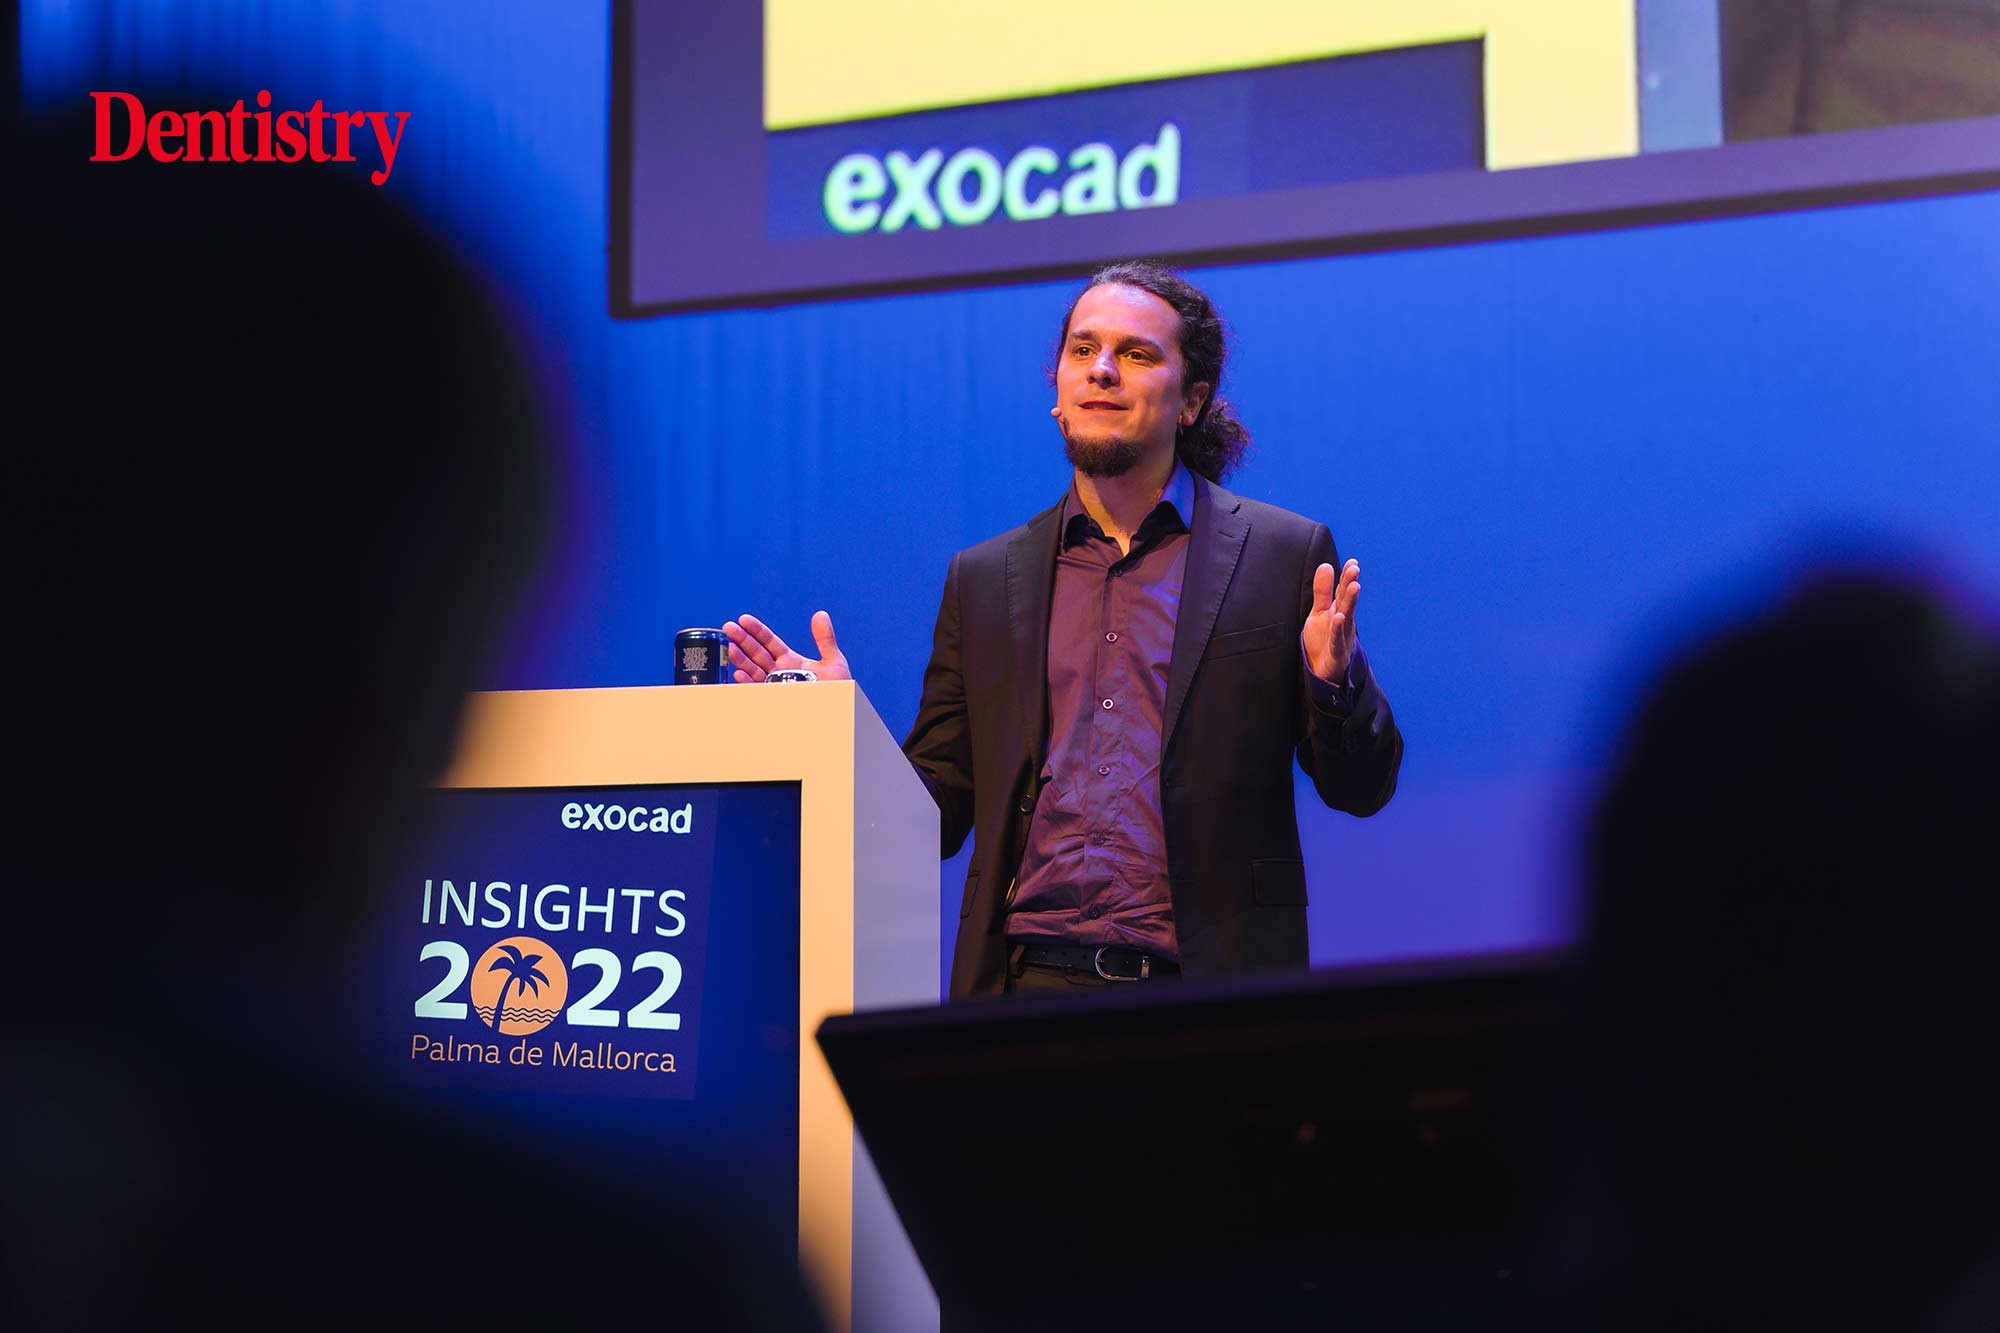 My experience of Exocad Insights 2022